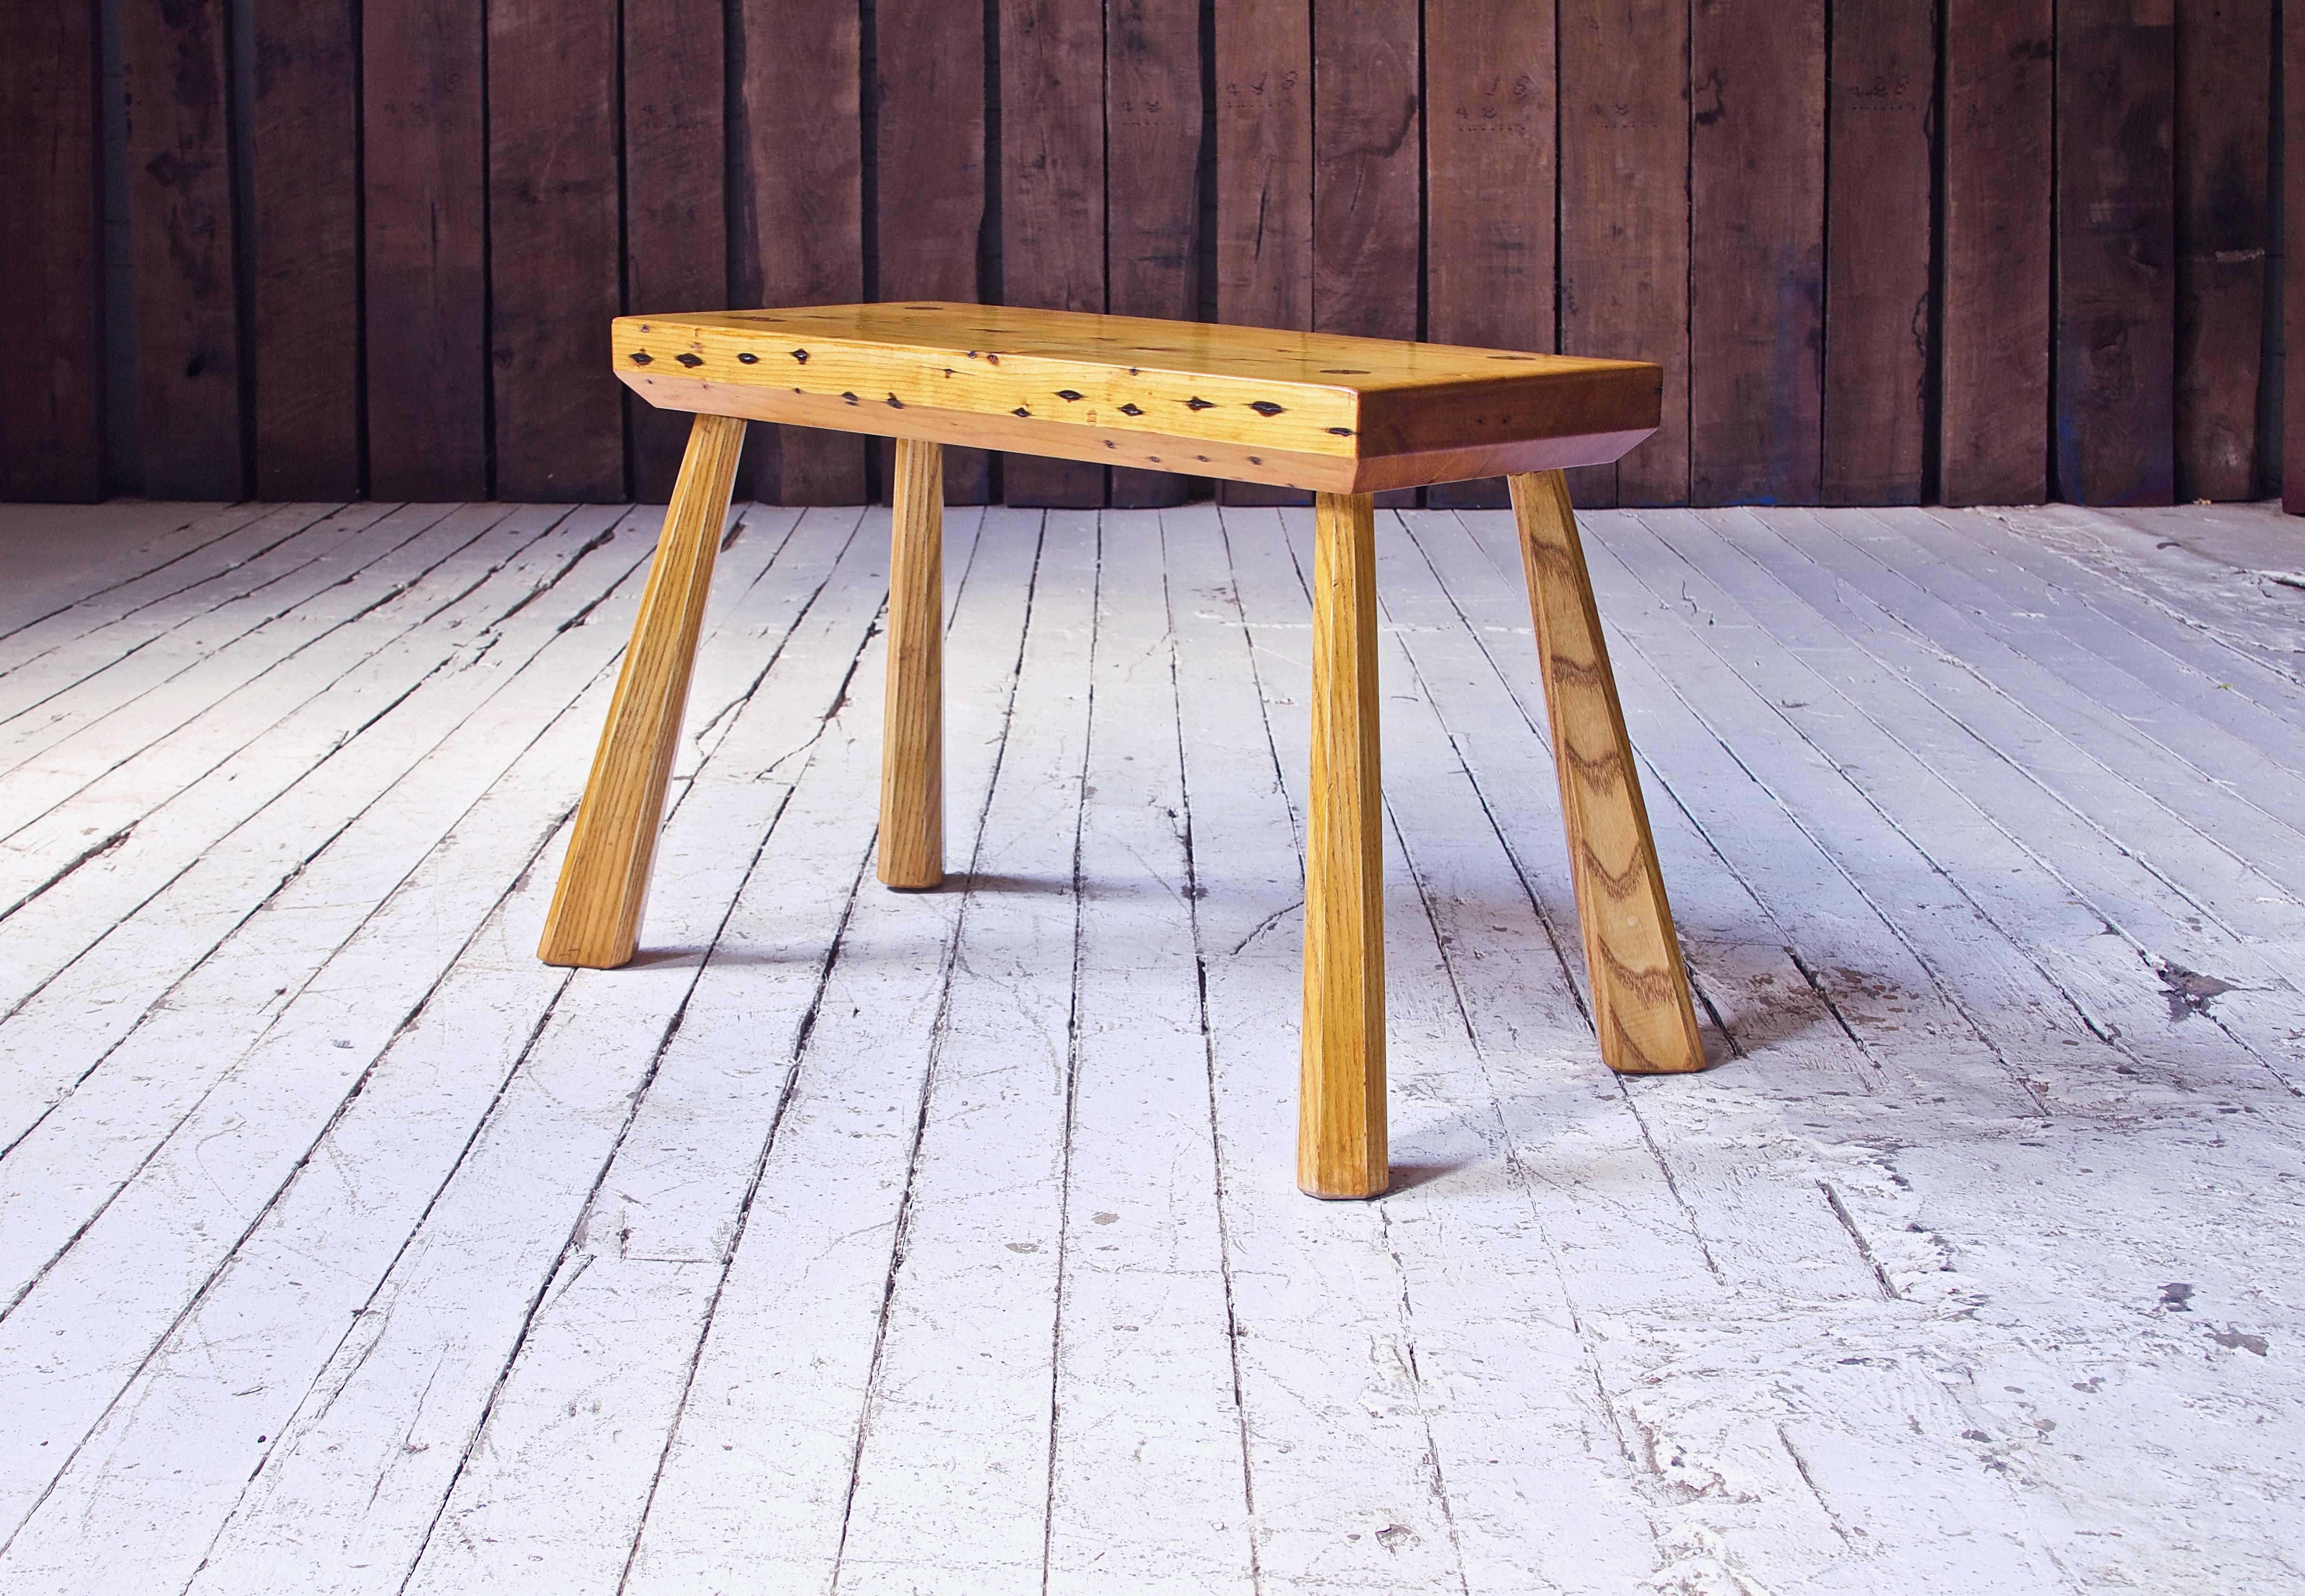 A rustic bench in Reclaimed White Pine and Ash inspired by the simple yet graceful furniture of the early American settlers. This type of archaic construction; tapering, chamfered splayed legs wedged through a slab top, was very common within